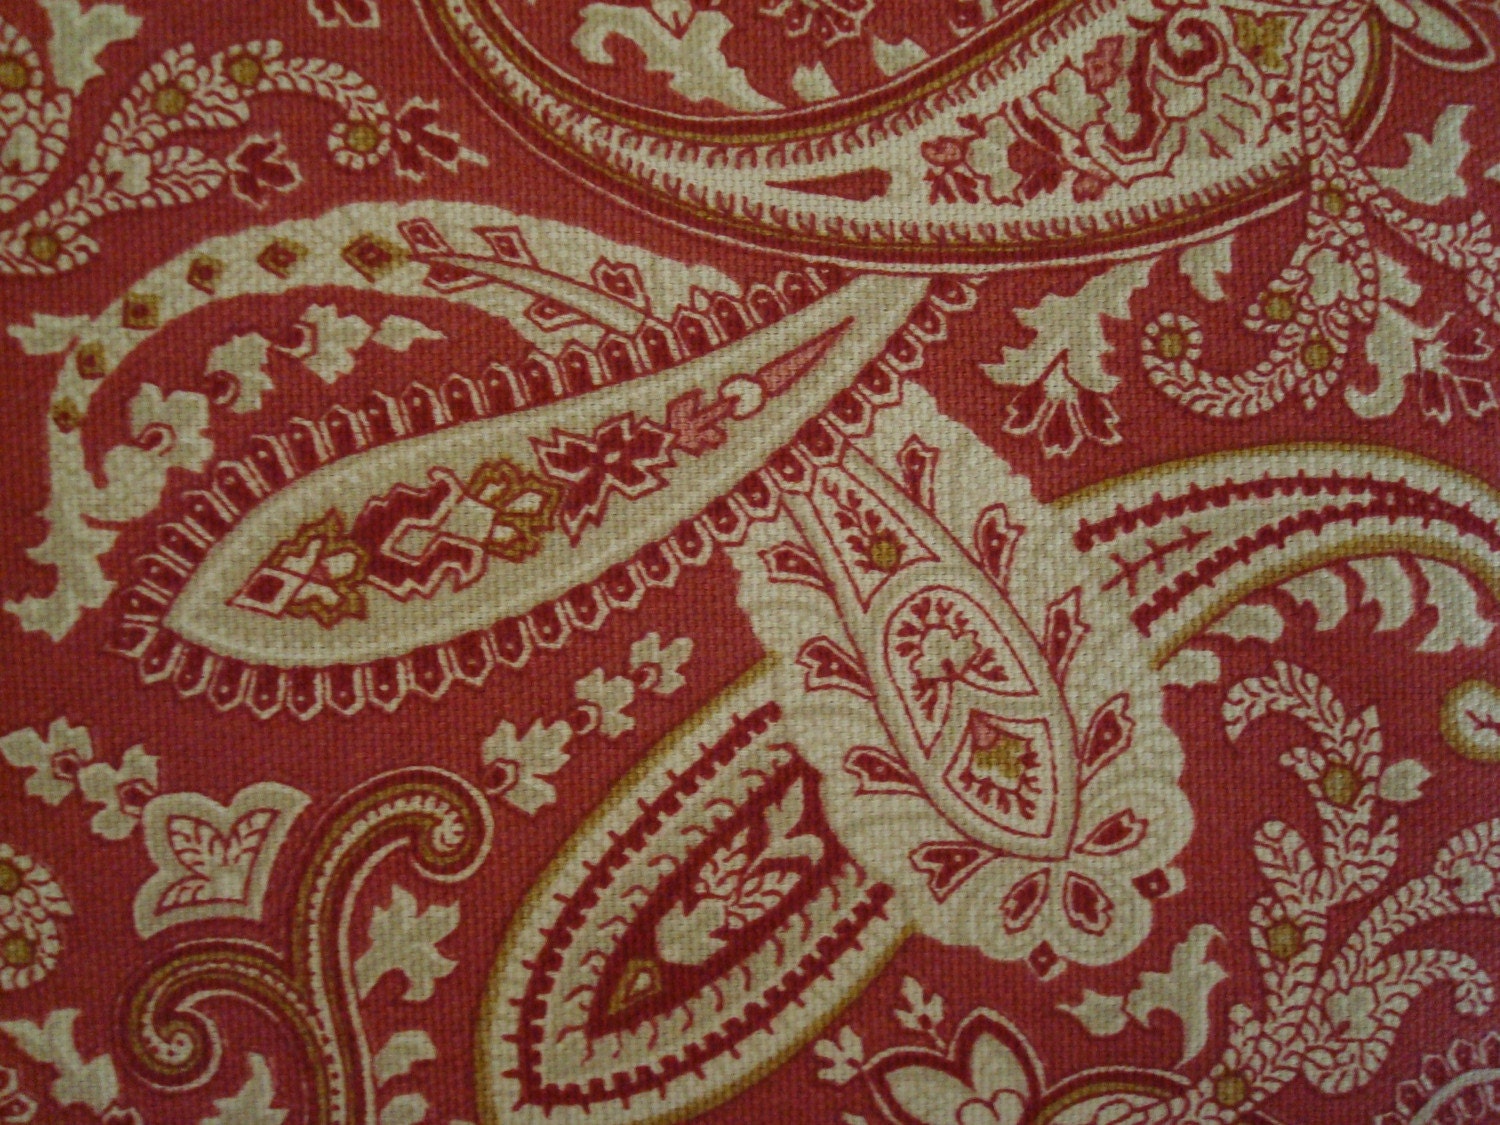 Cotton Upholstery Fabric, Paisley Deep Rose Pink Fabric, 2 Yards